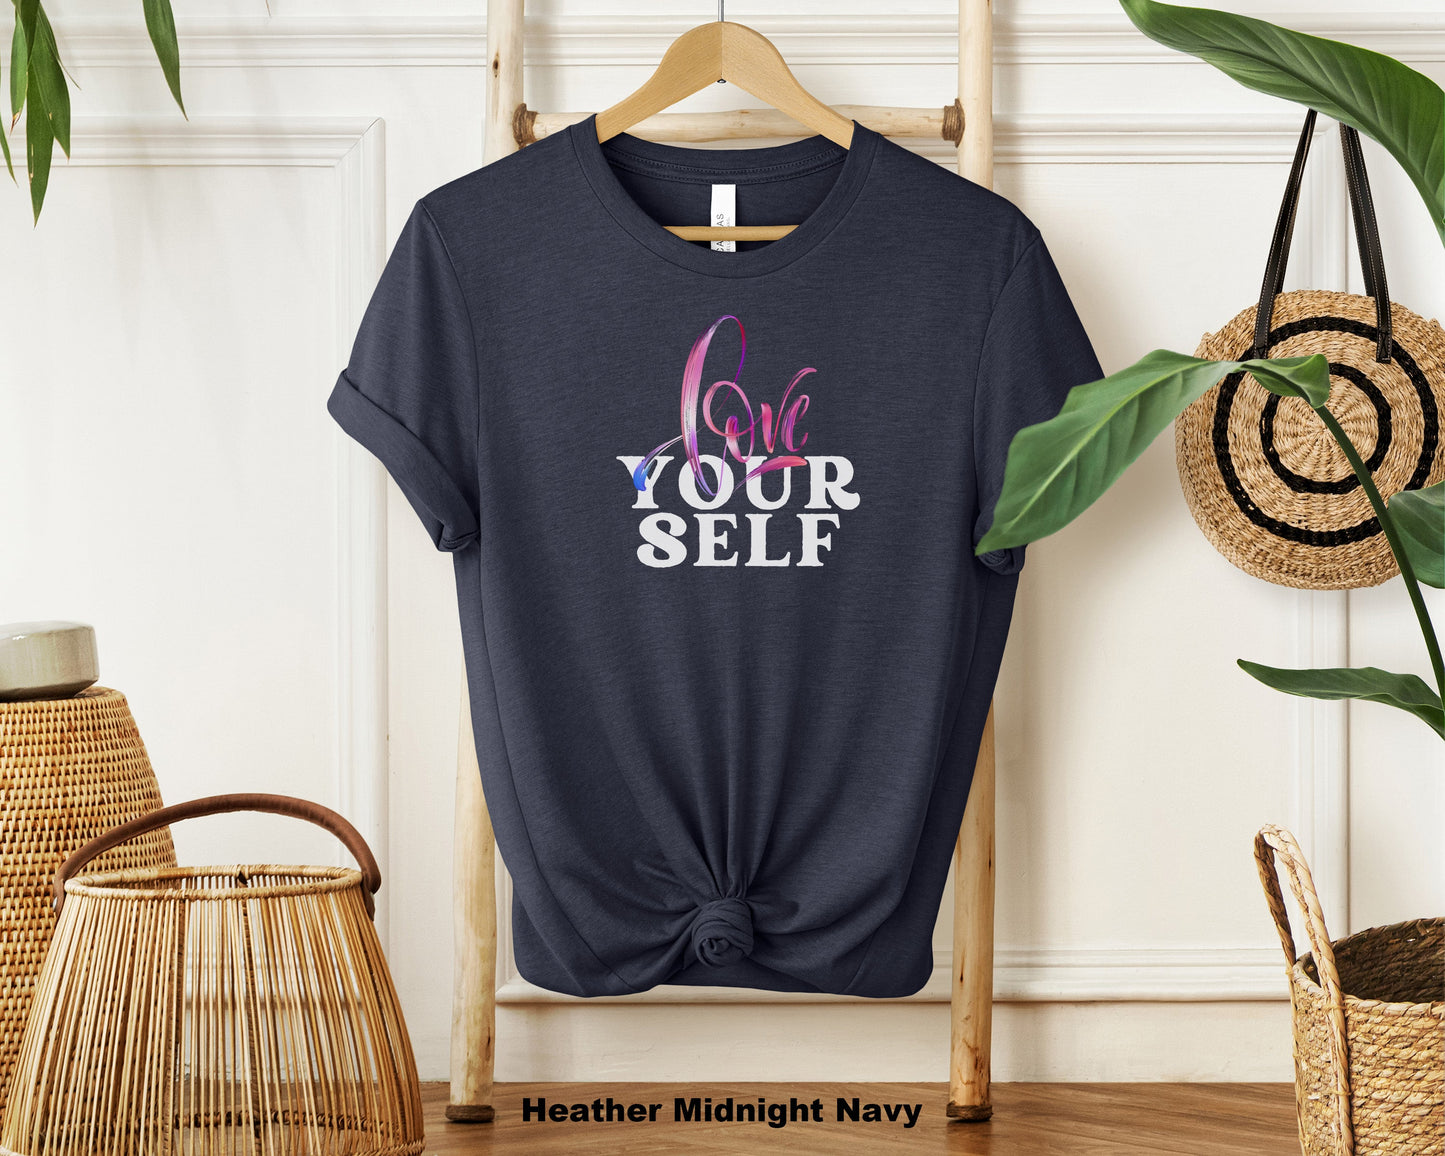 "Love Yourself Inspirational Classic Unisex T-Shirt for Dreamers and Achievers"